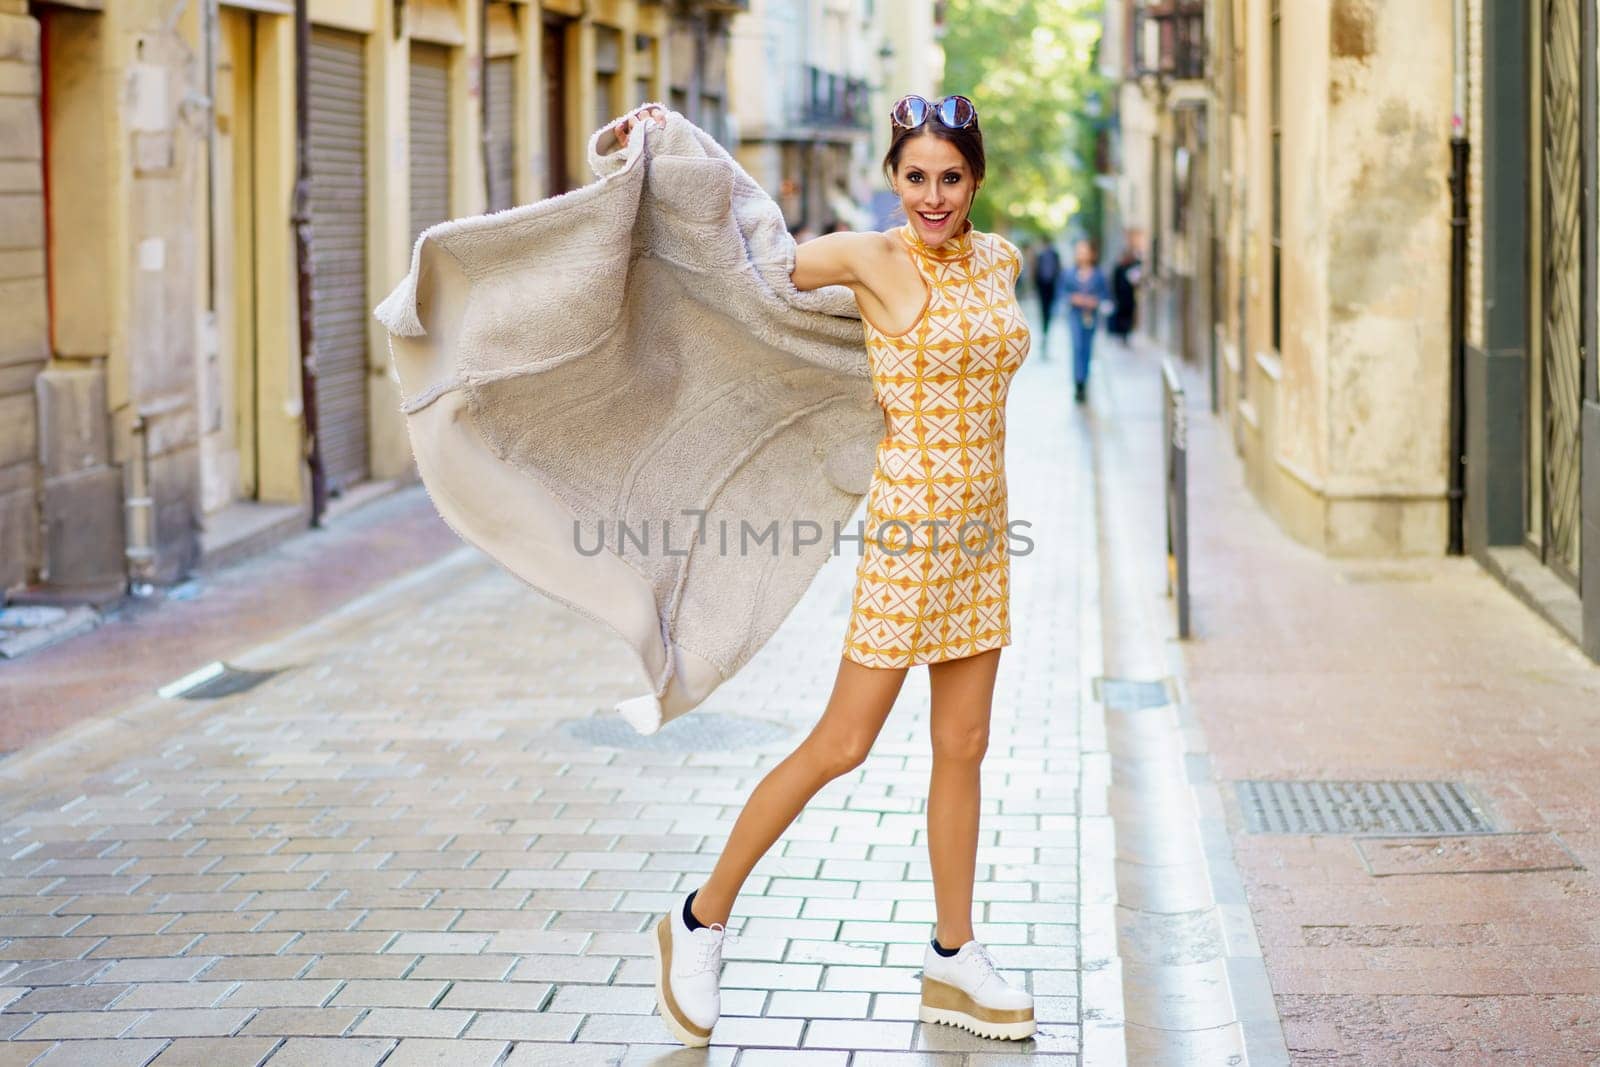 Stylish young woman standing on street and holding long coat in town by javiindy